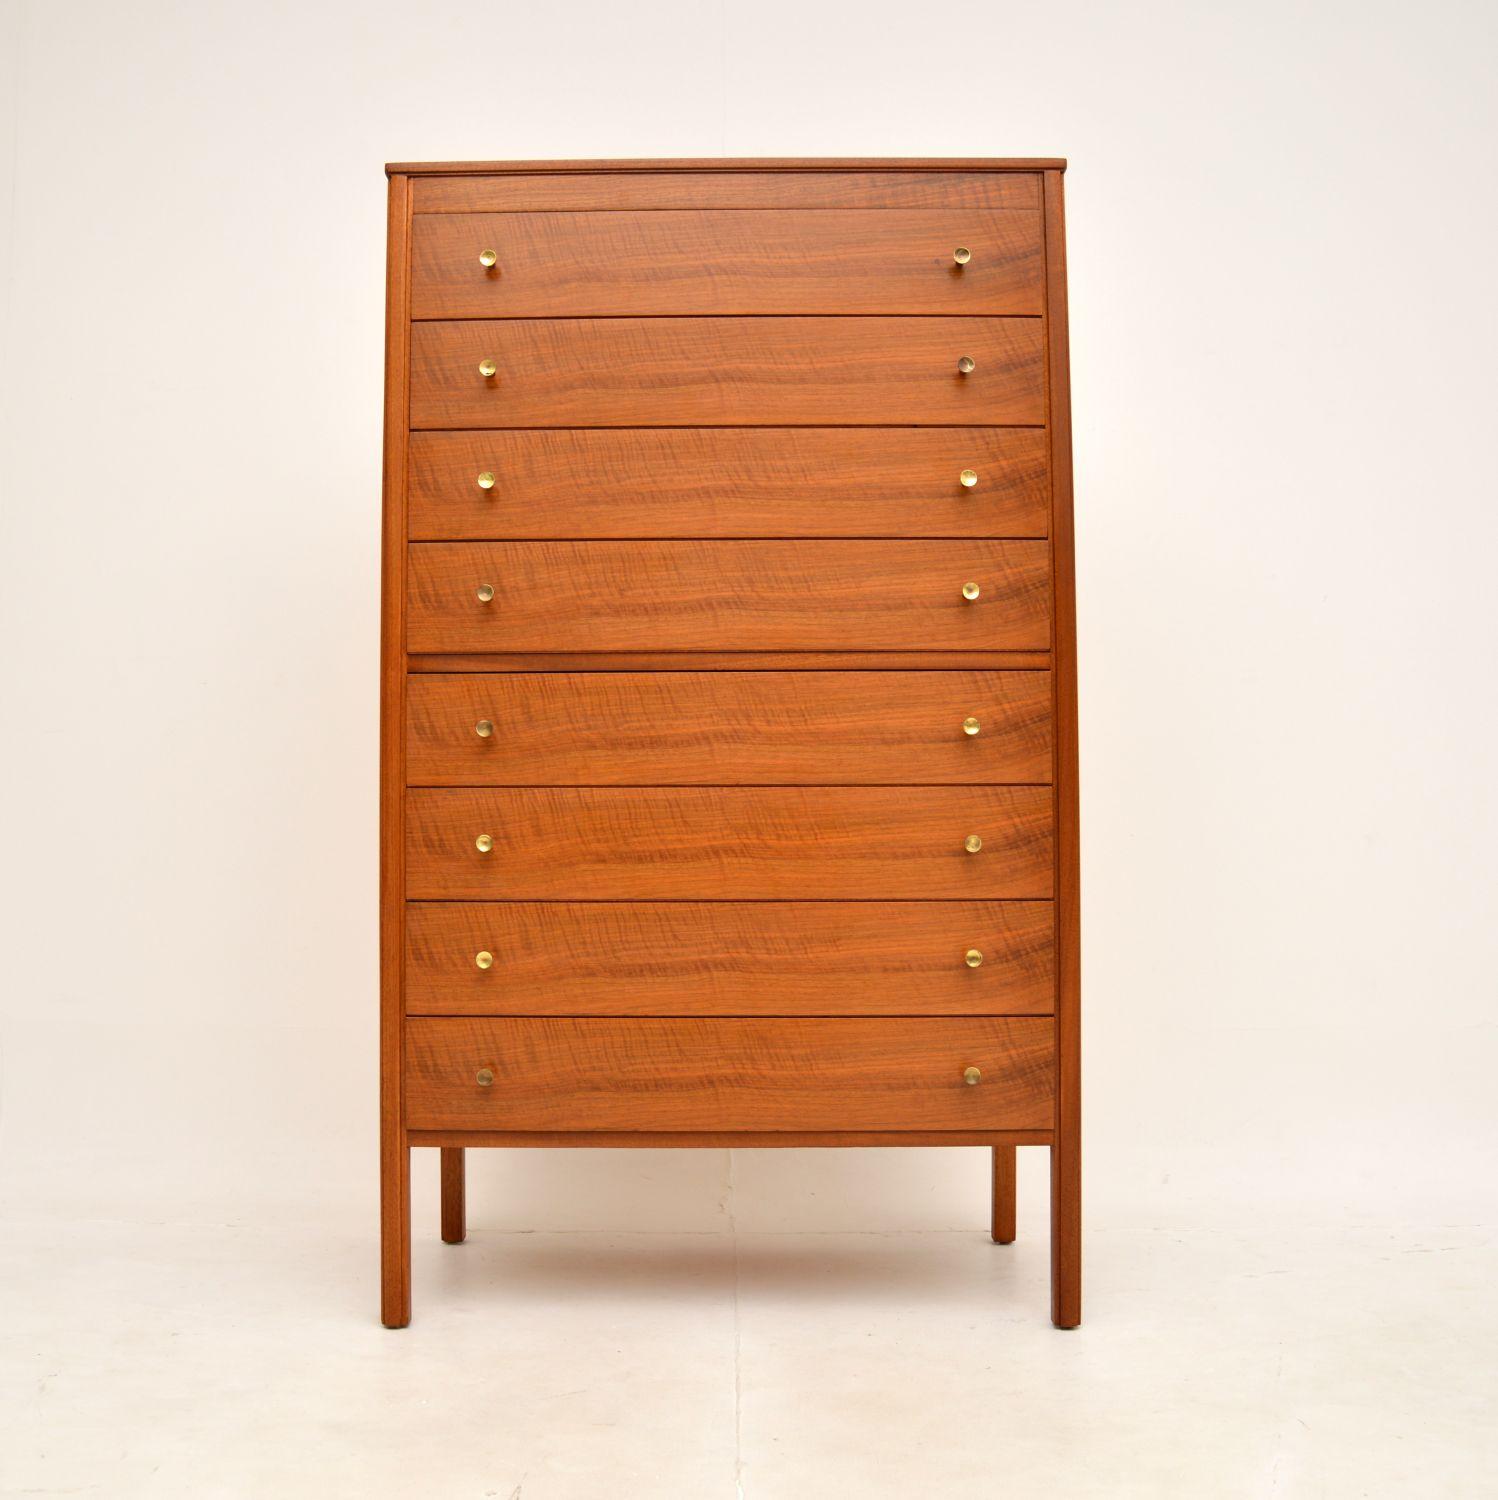 A stunning vintage walnut tallboy chest of drawers. This was made in England, it dates from the 1960’s.

It is of superb quality, it is a very large and useful size. There is lots of storage space, the drawers have lovely brass handles and this has